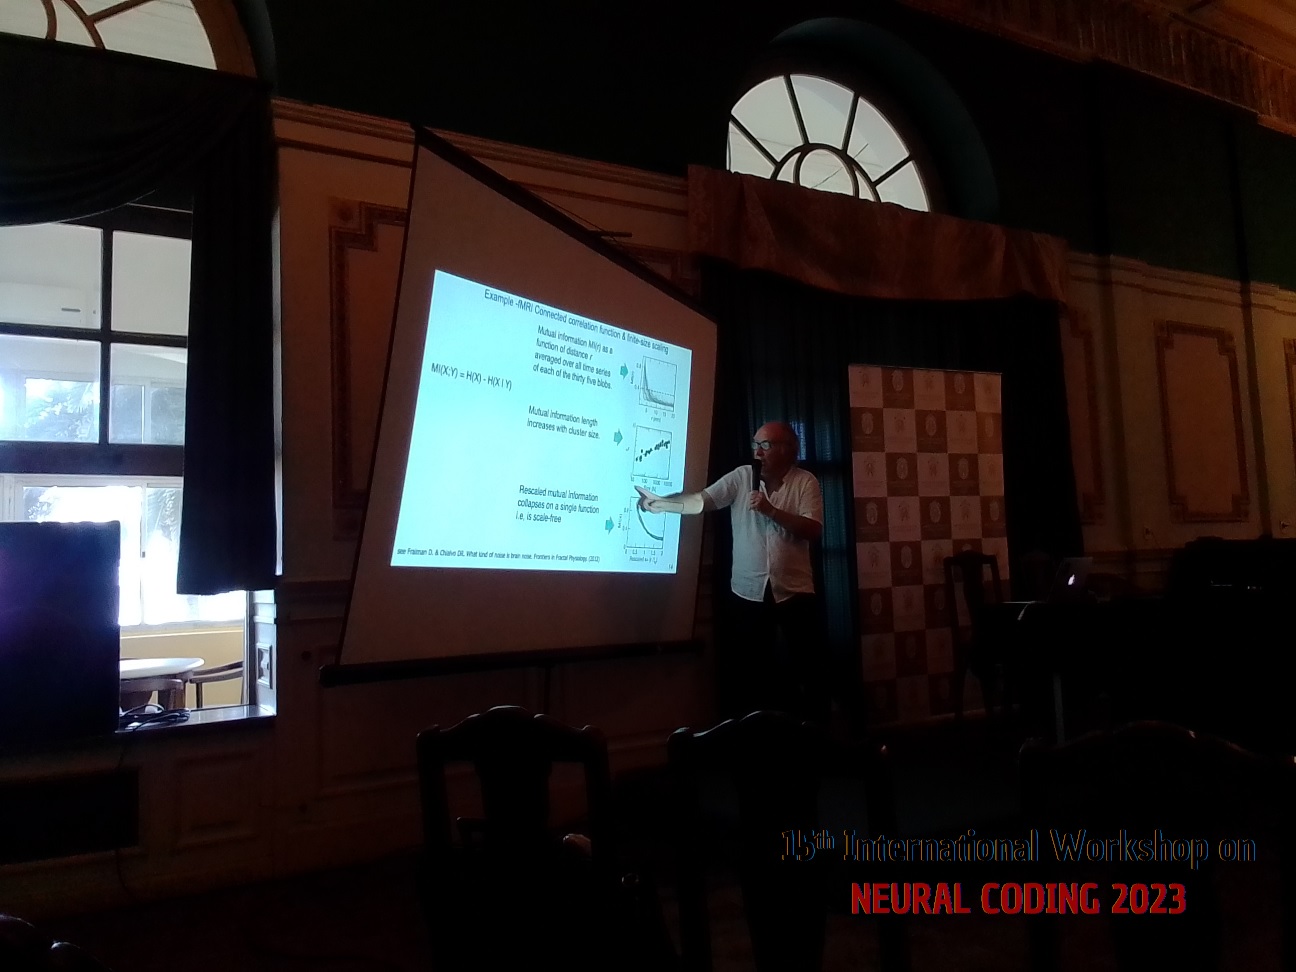 Given a perturbation to a neural system of a given size, how far do you need to go find another system that is decorrelated from such perturbation? Dante Chialvo presents correlation lengths and scaling properties as a means to probe borderline regimes of critical behavior in cortex.